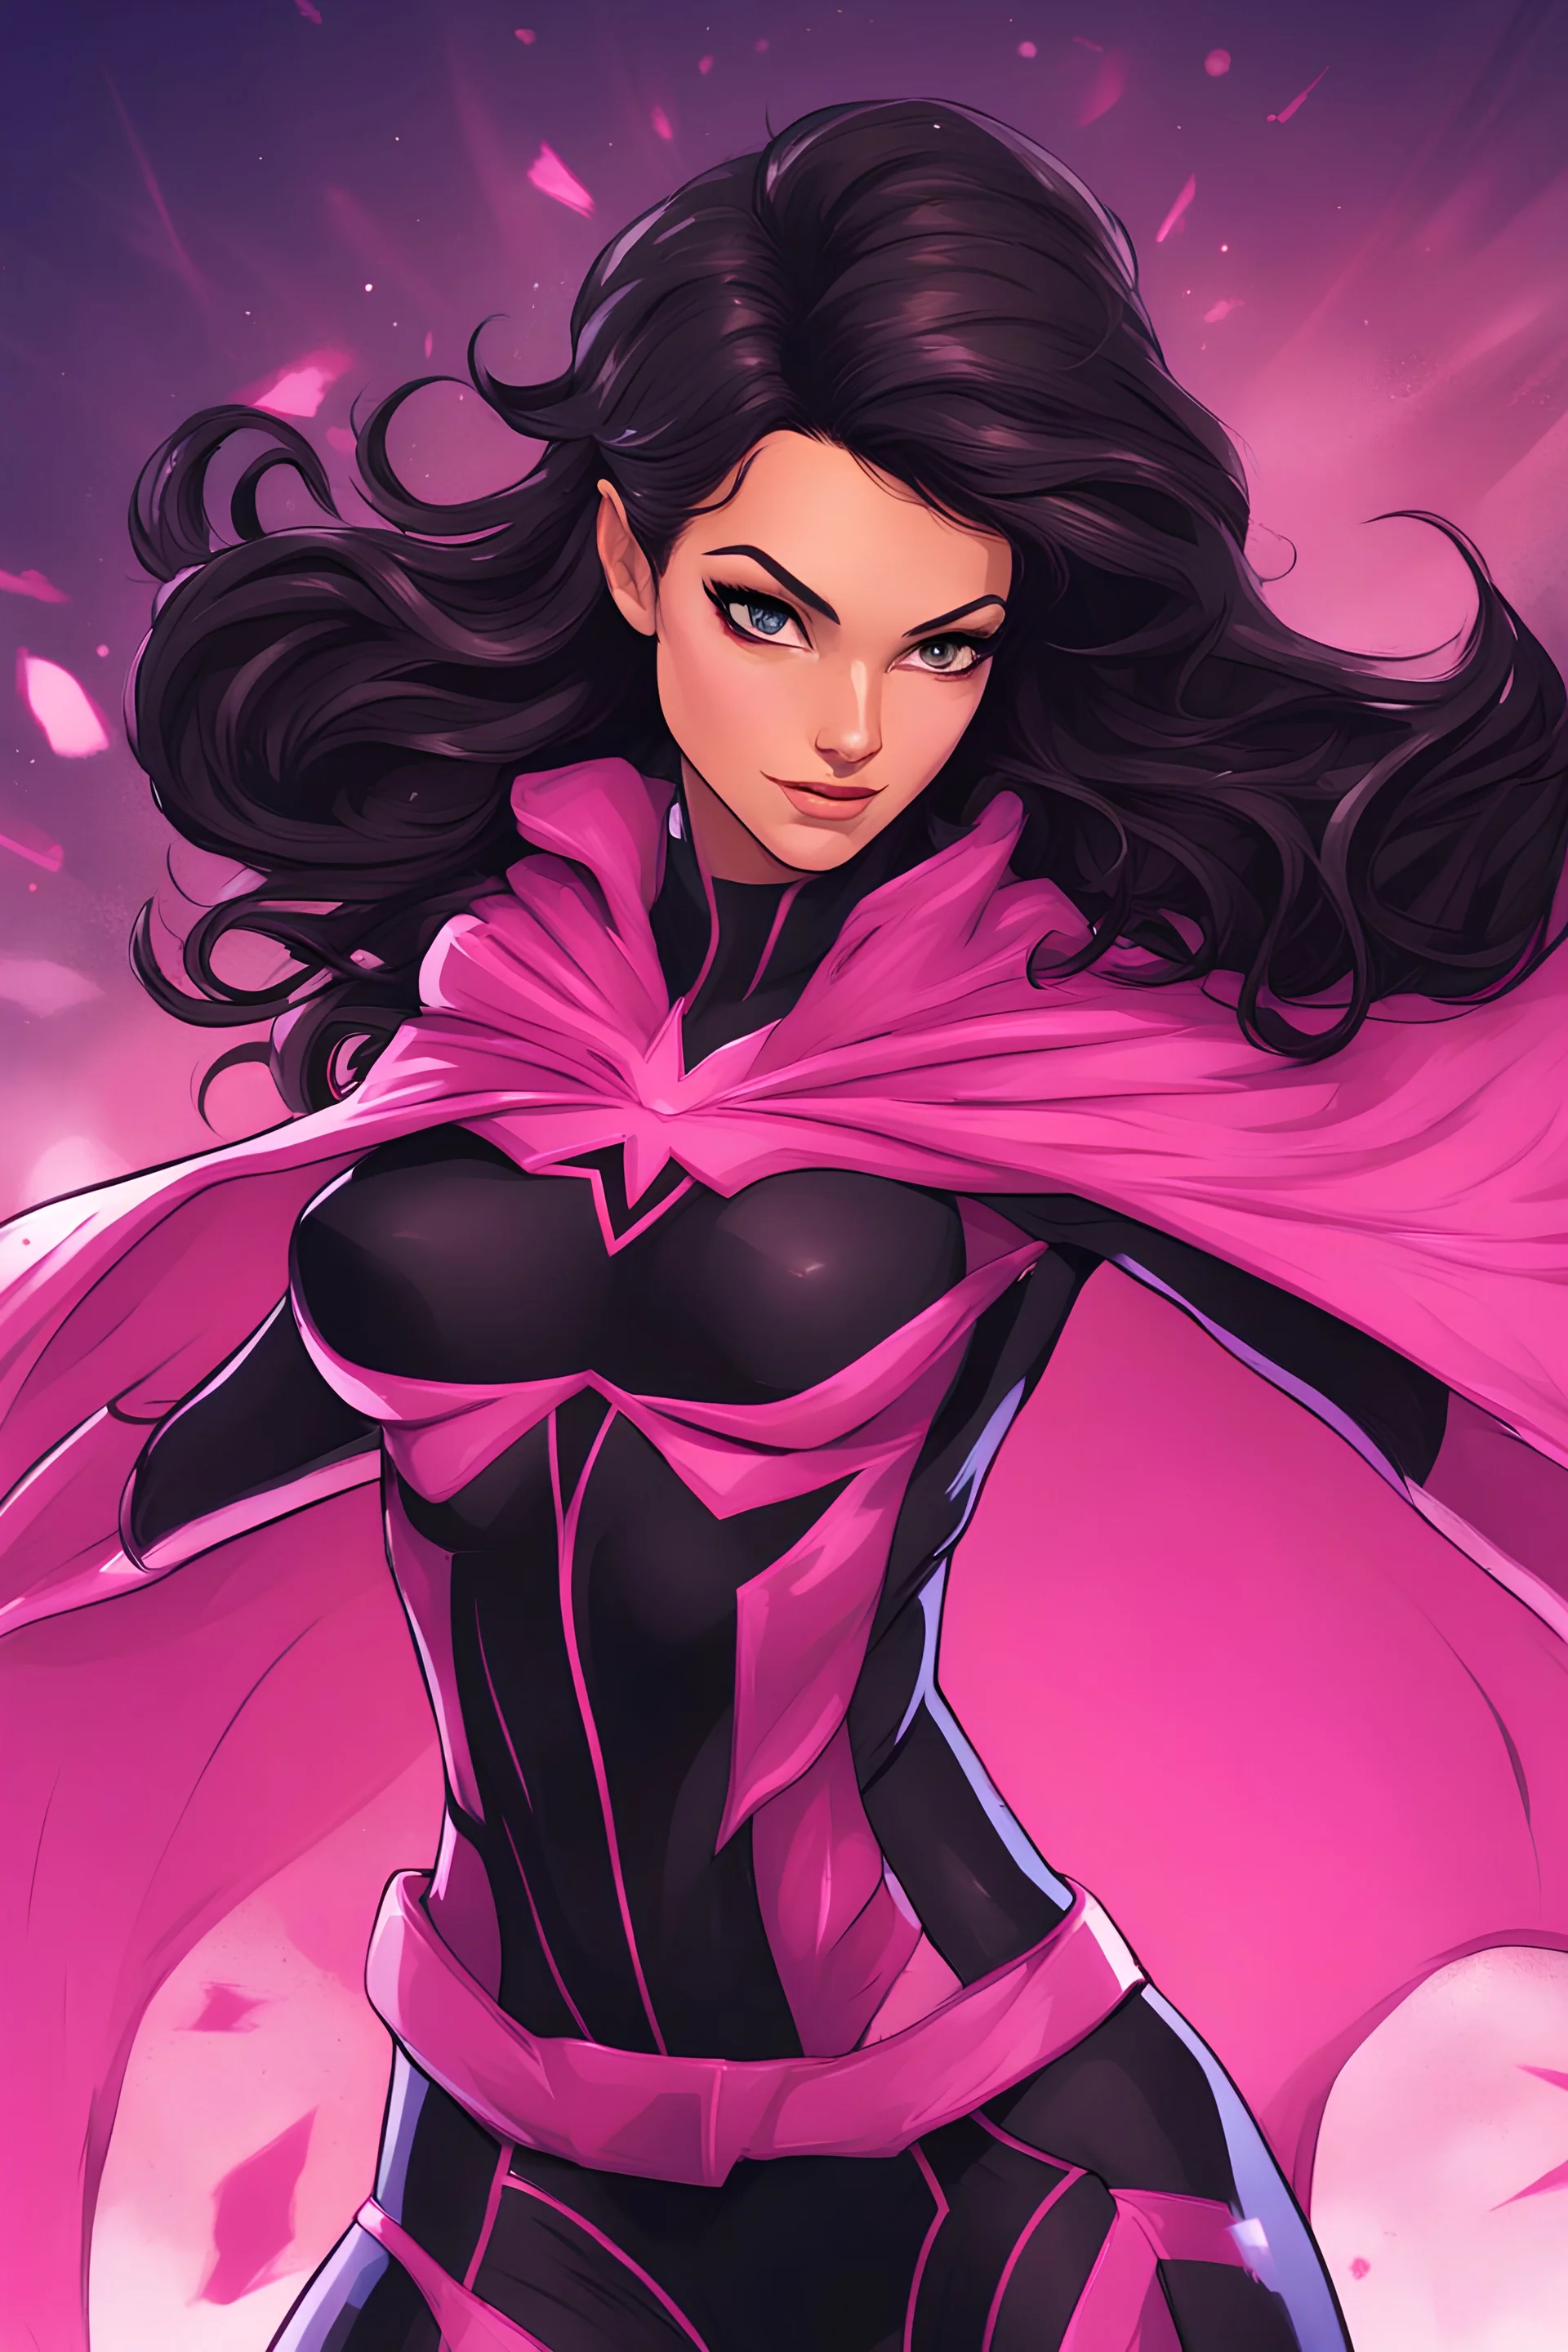 A superhero suit with a vibrant and energetic combination of pink and purple, with sparkles and a cape that flows gracefully. It would reflect her playful and adventurous nature, she has brown eyes and black brunette hair.